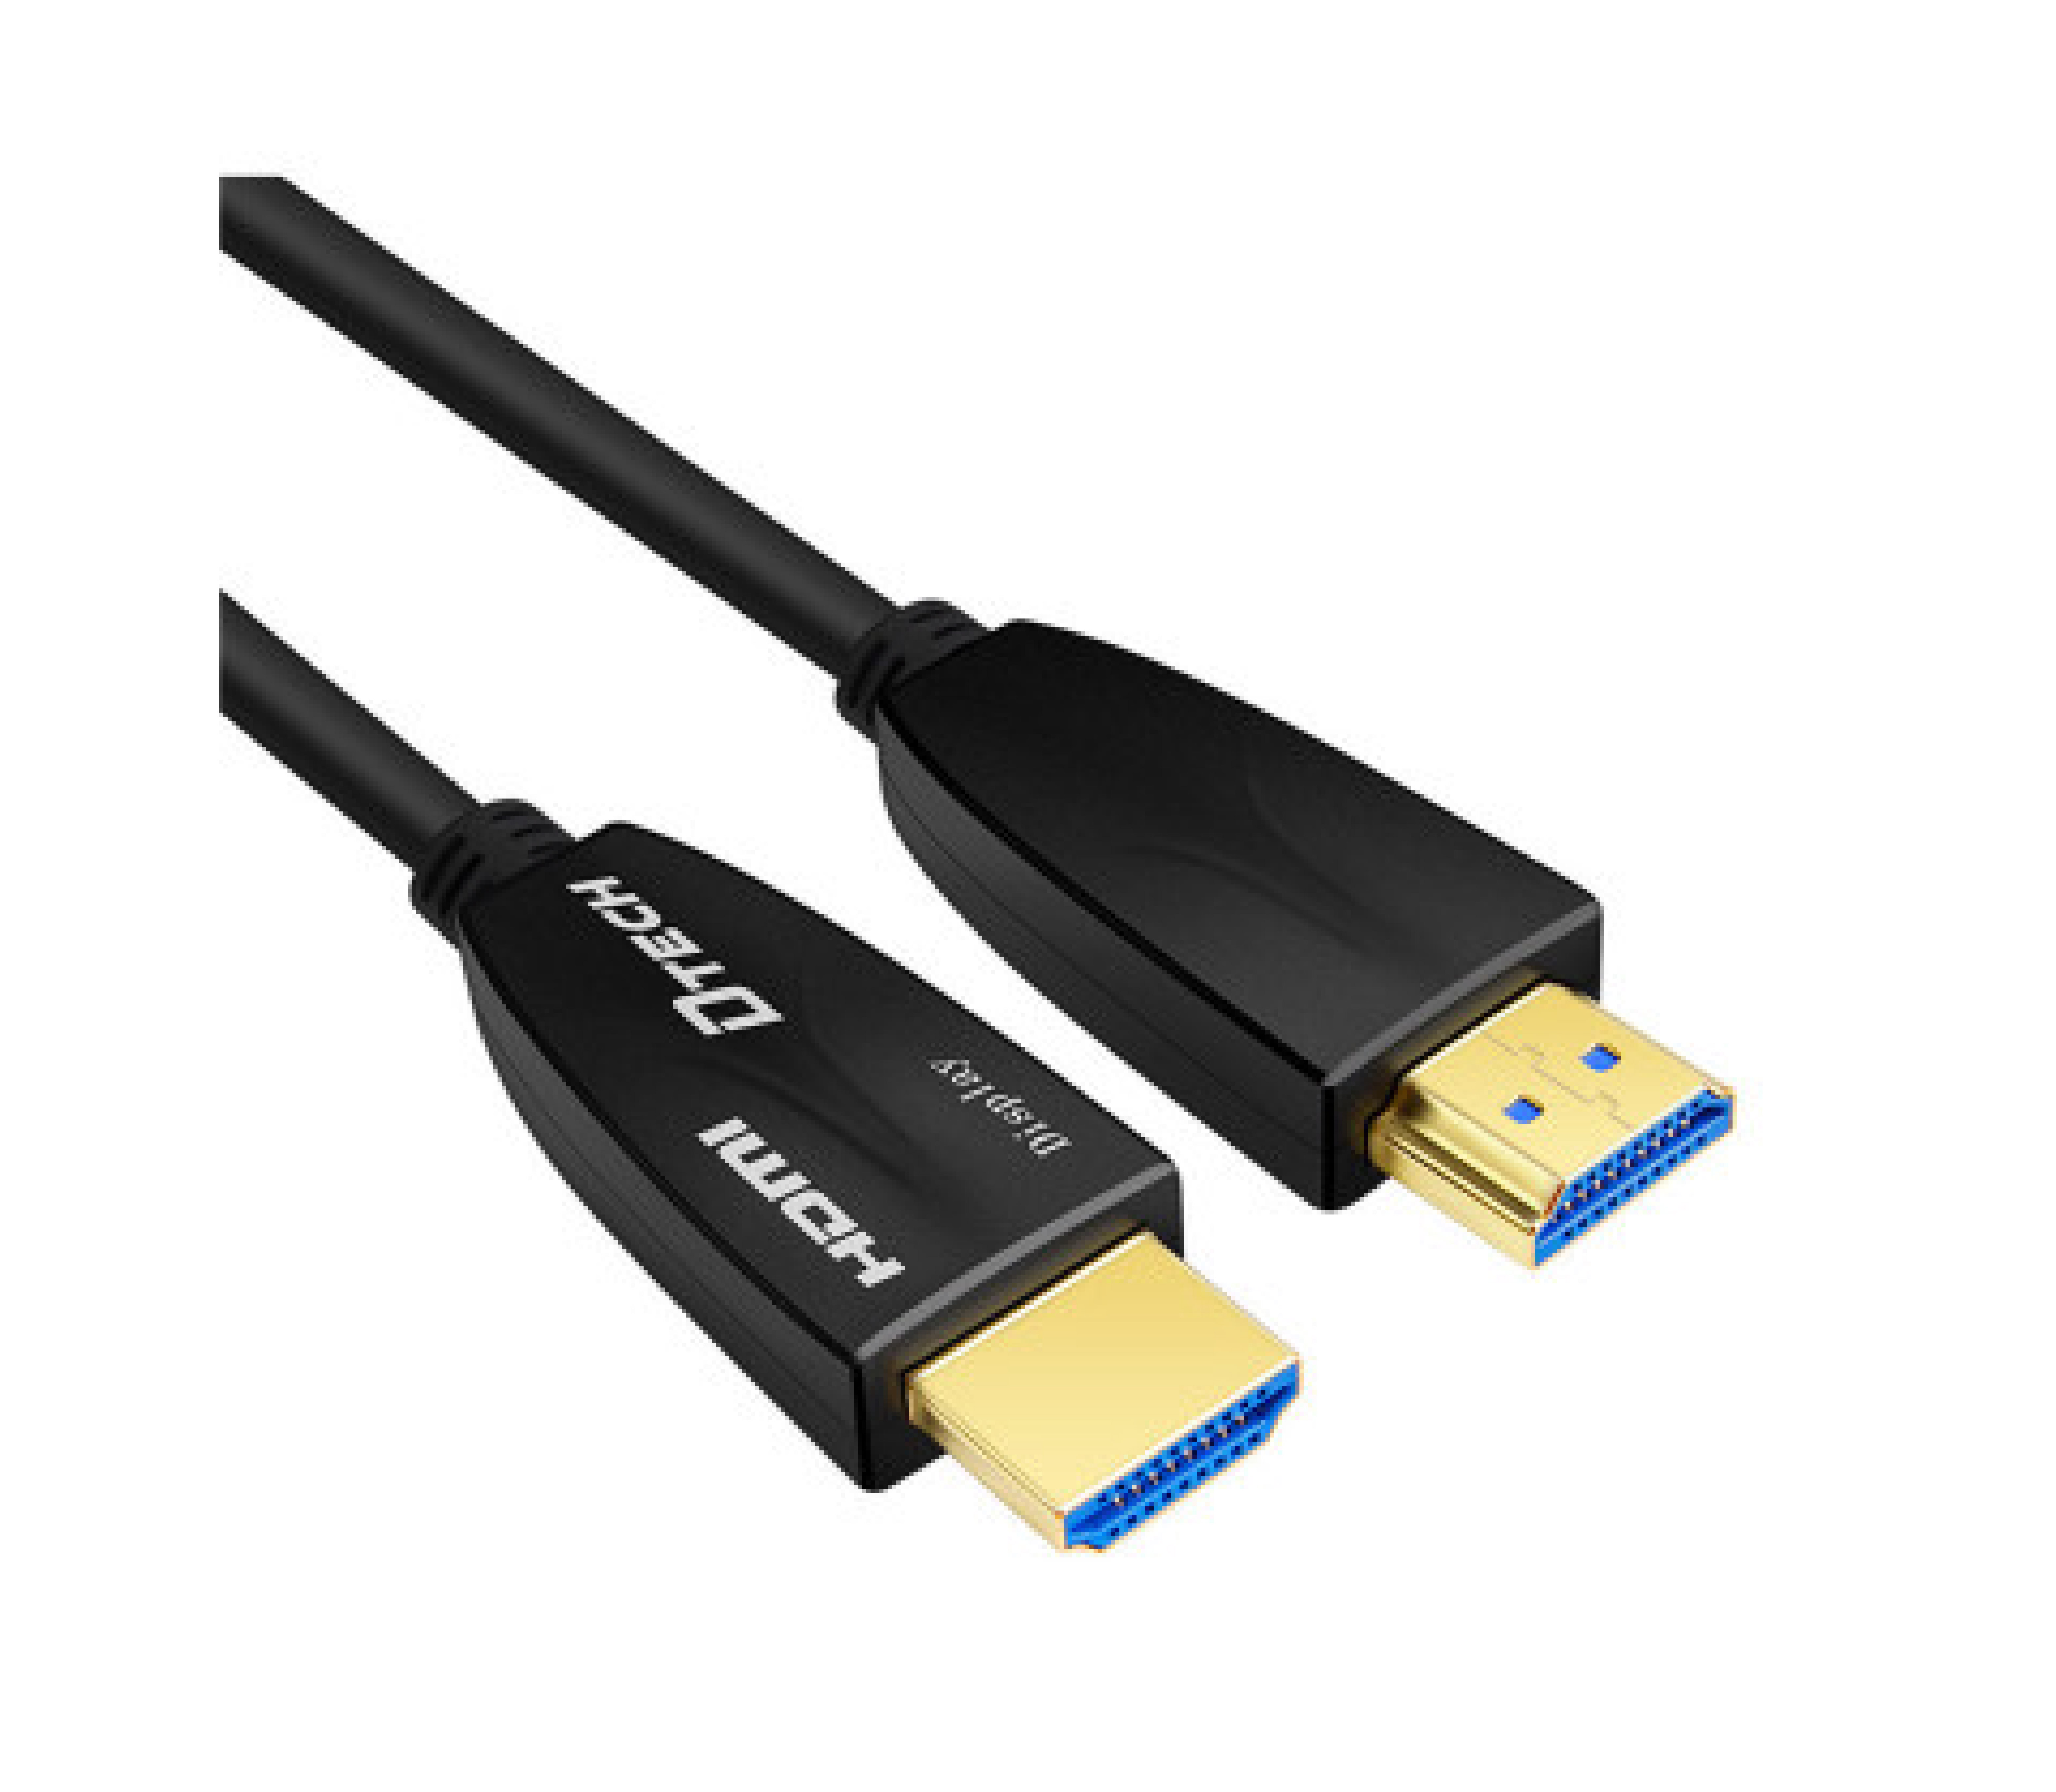 DTECH DT-HF2015 Cable HDMI